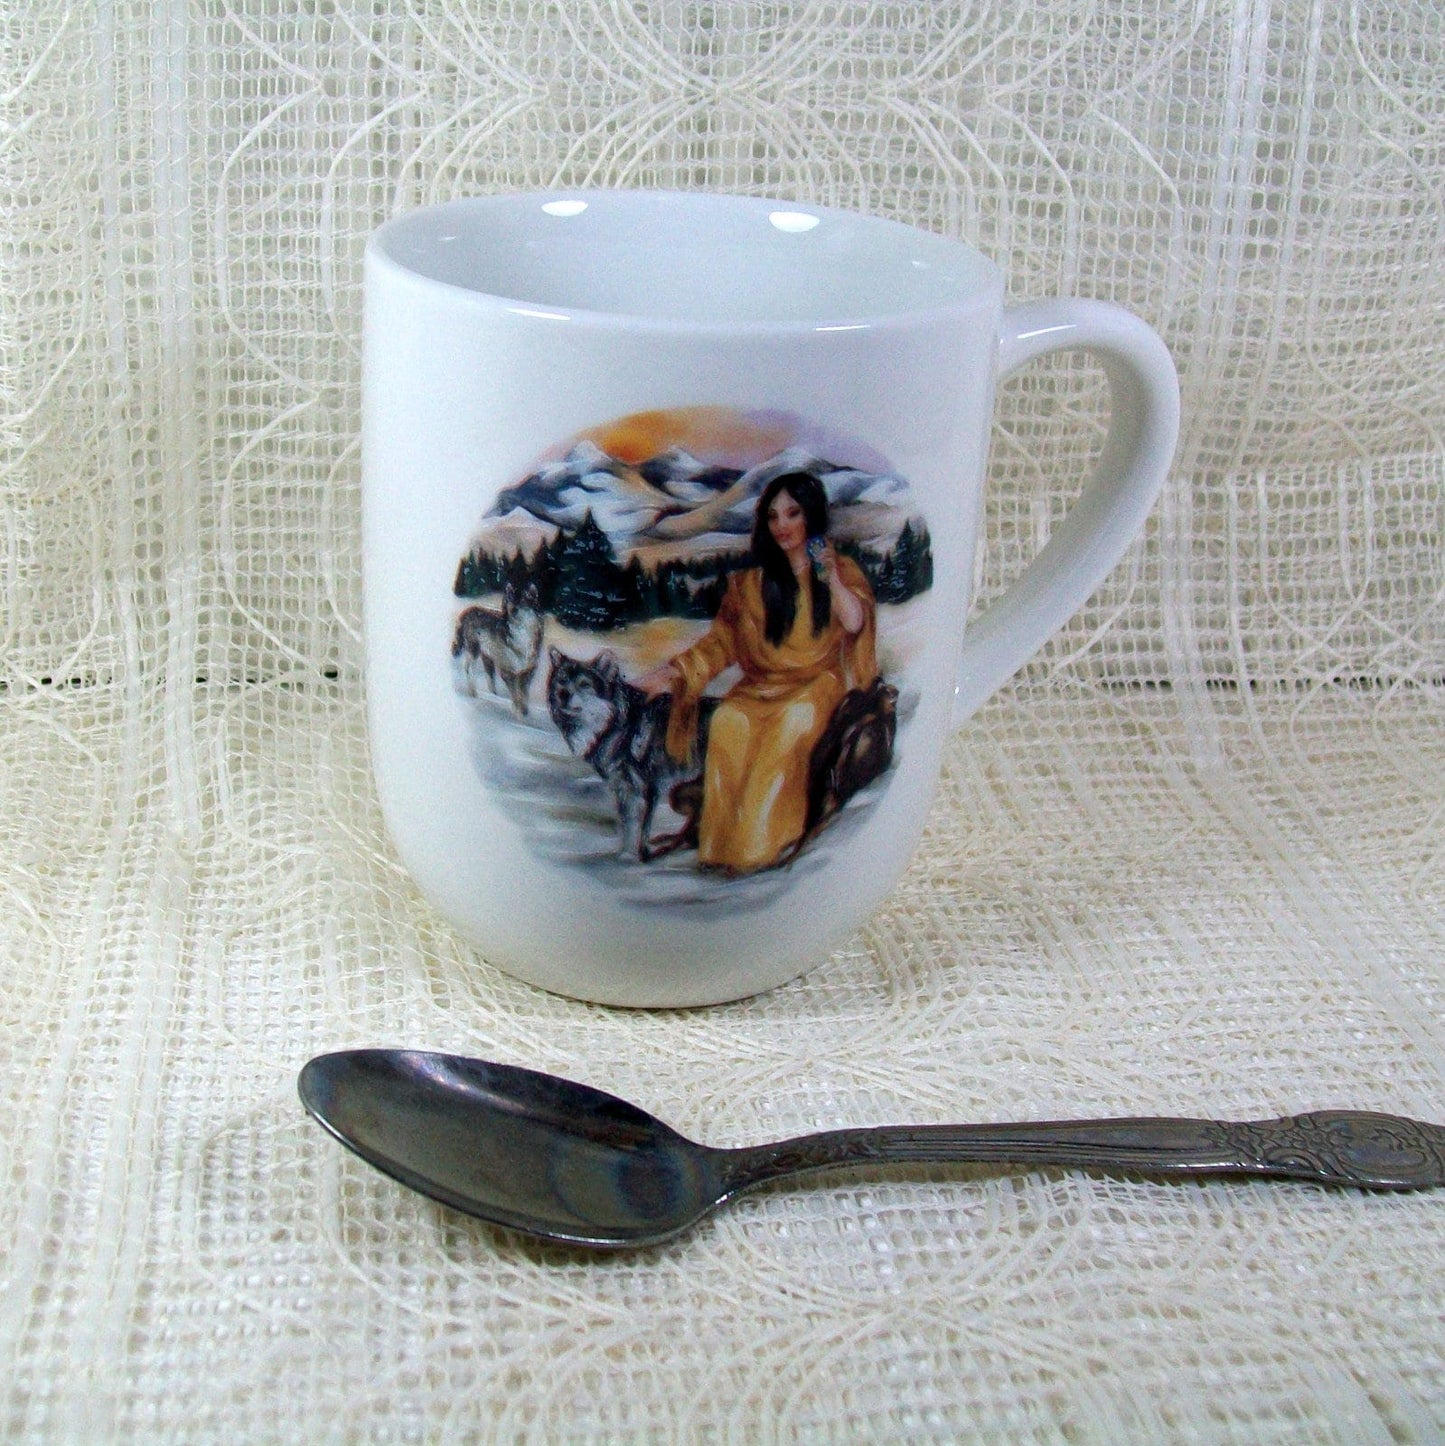 White glossy mug with native American girl.  The mug is on an off wihite lacy cloth and there is a tea spoon in front of it for size comparison